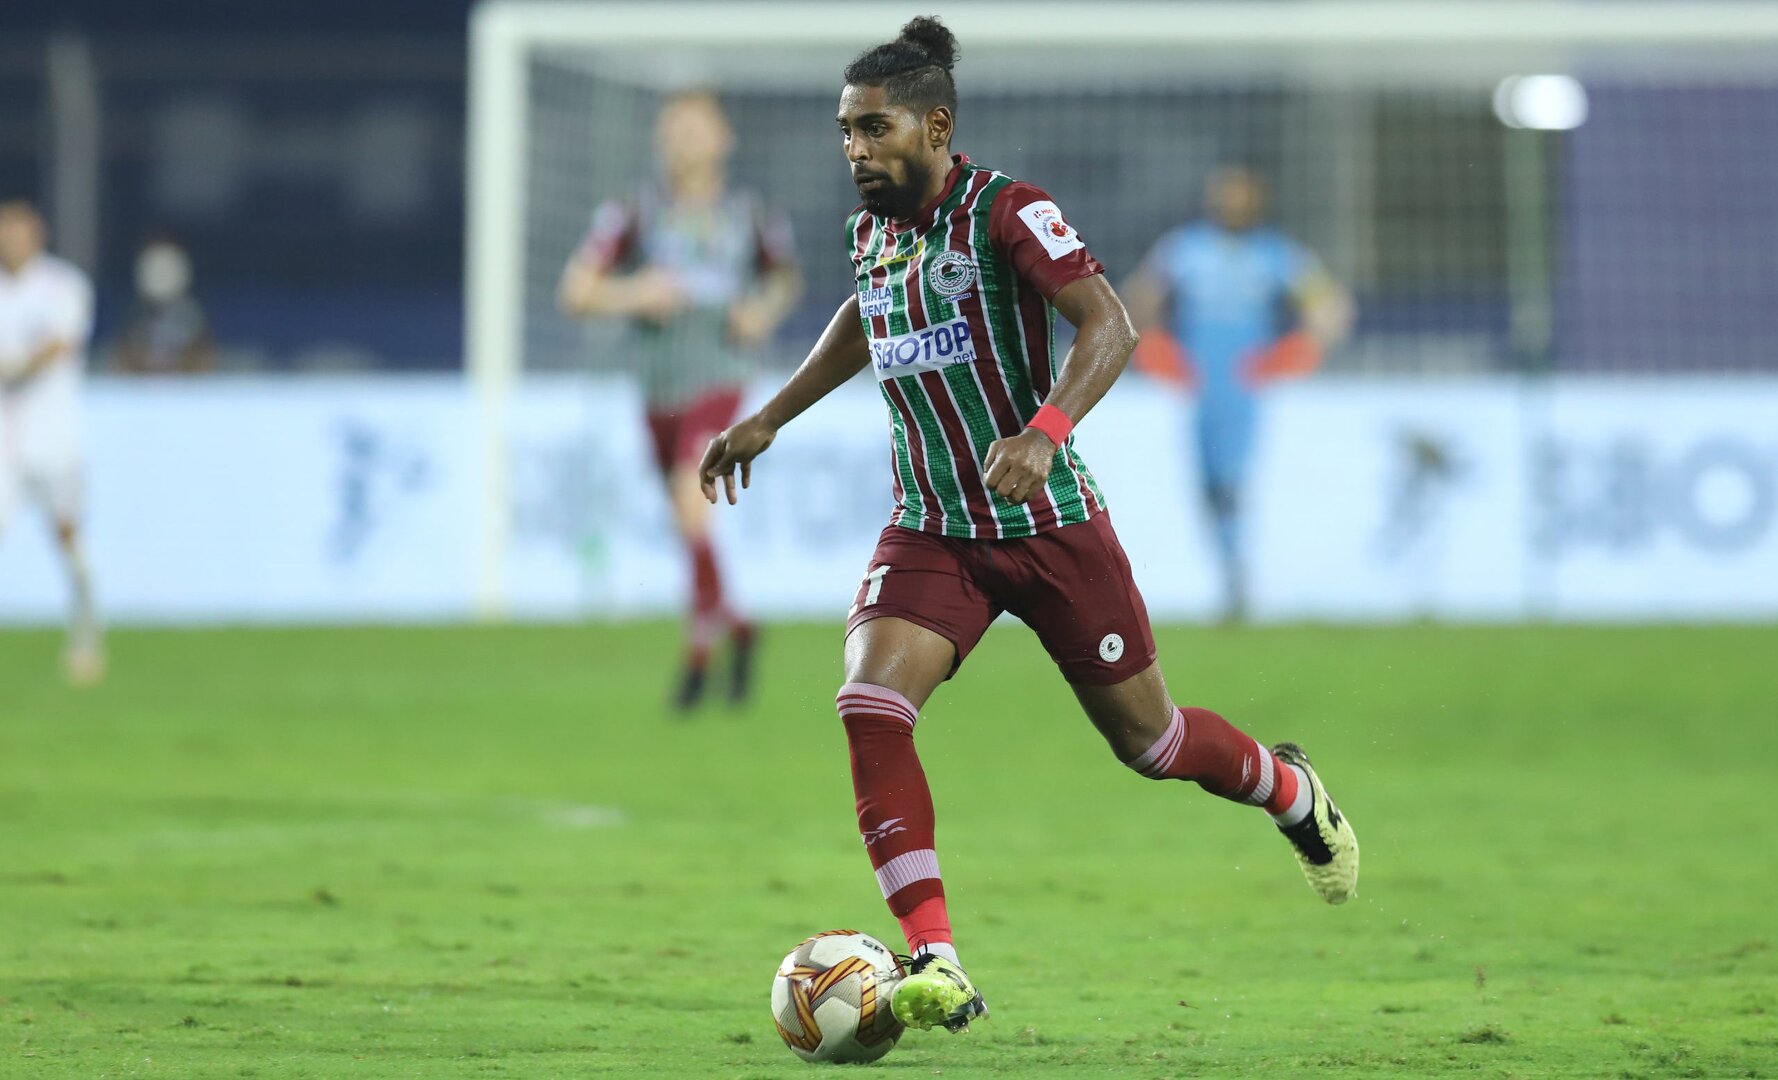 ISL 2022-23: Former ATK Mohun Bagan forward Roy Krishna REVEALS why he left the Mariners, says 'it was coach's DECISION, not mine'. ISL 2022-23 LIVE Updates.